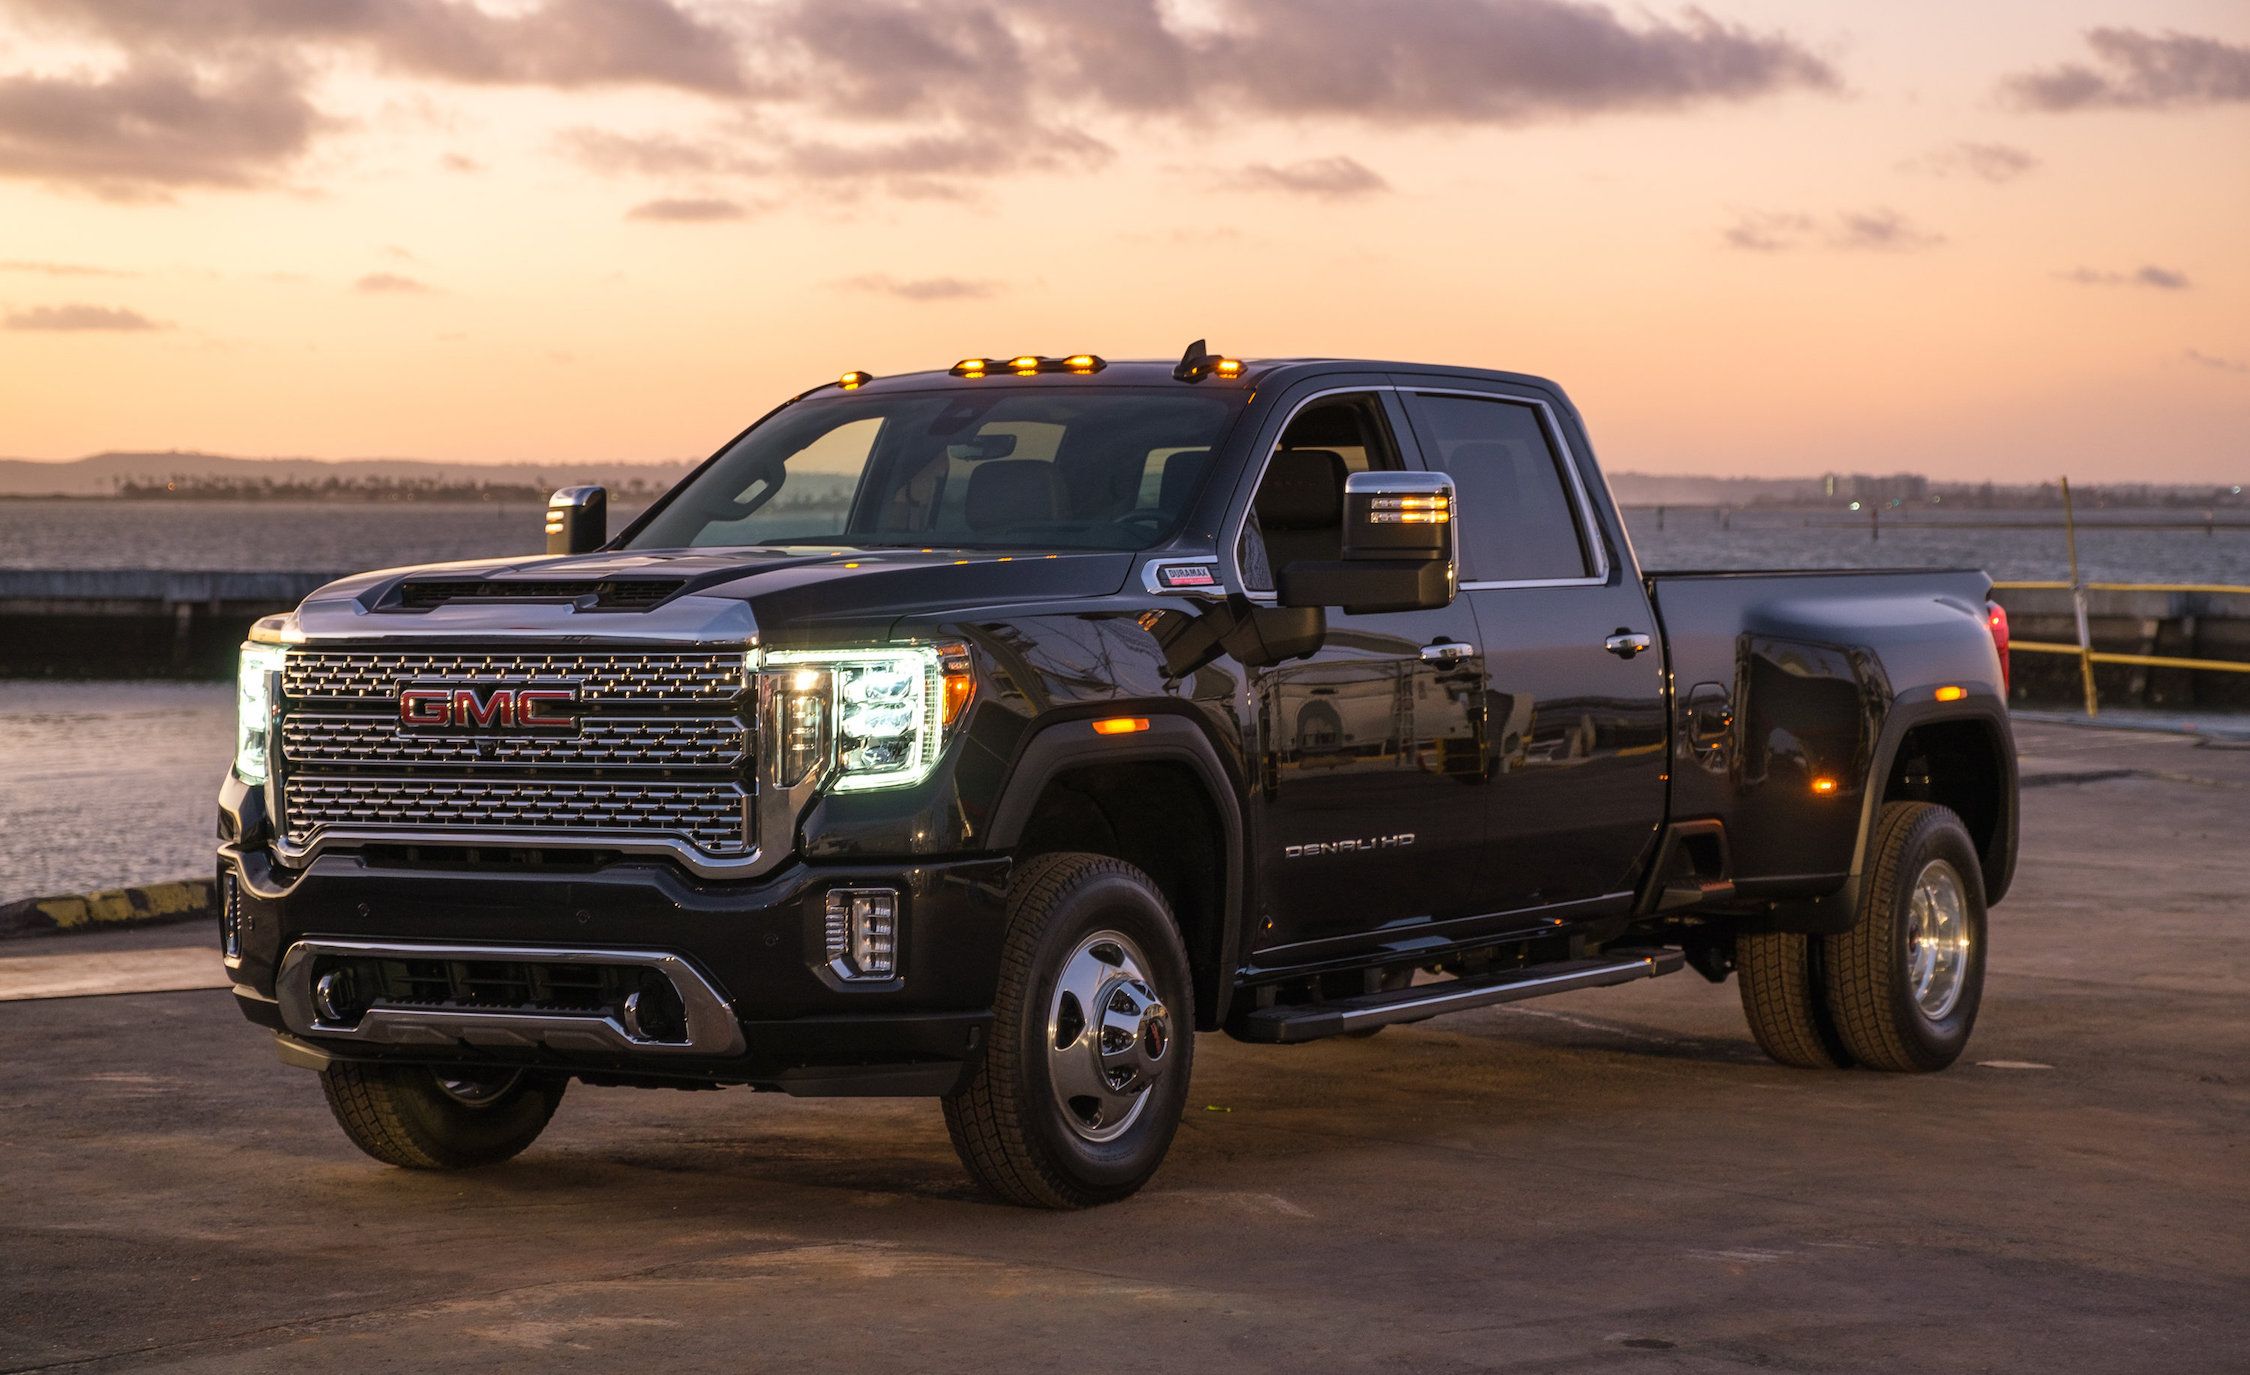 2020 GMC Sierra HD 2500 and 3500 Priced - Details for the Lineup